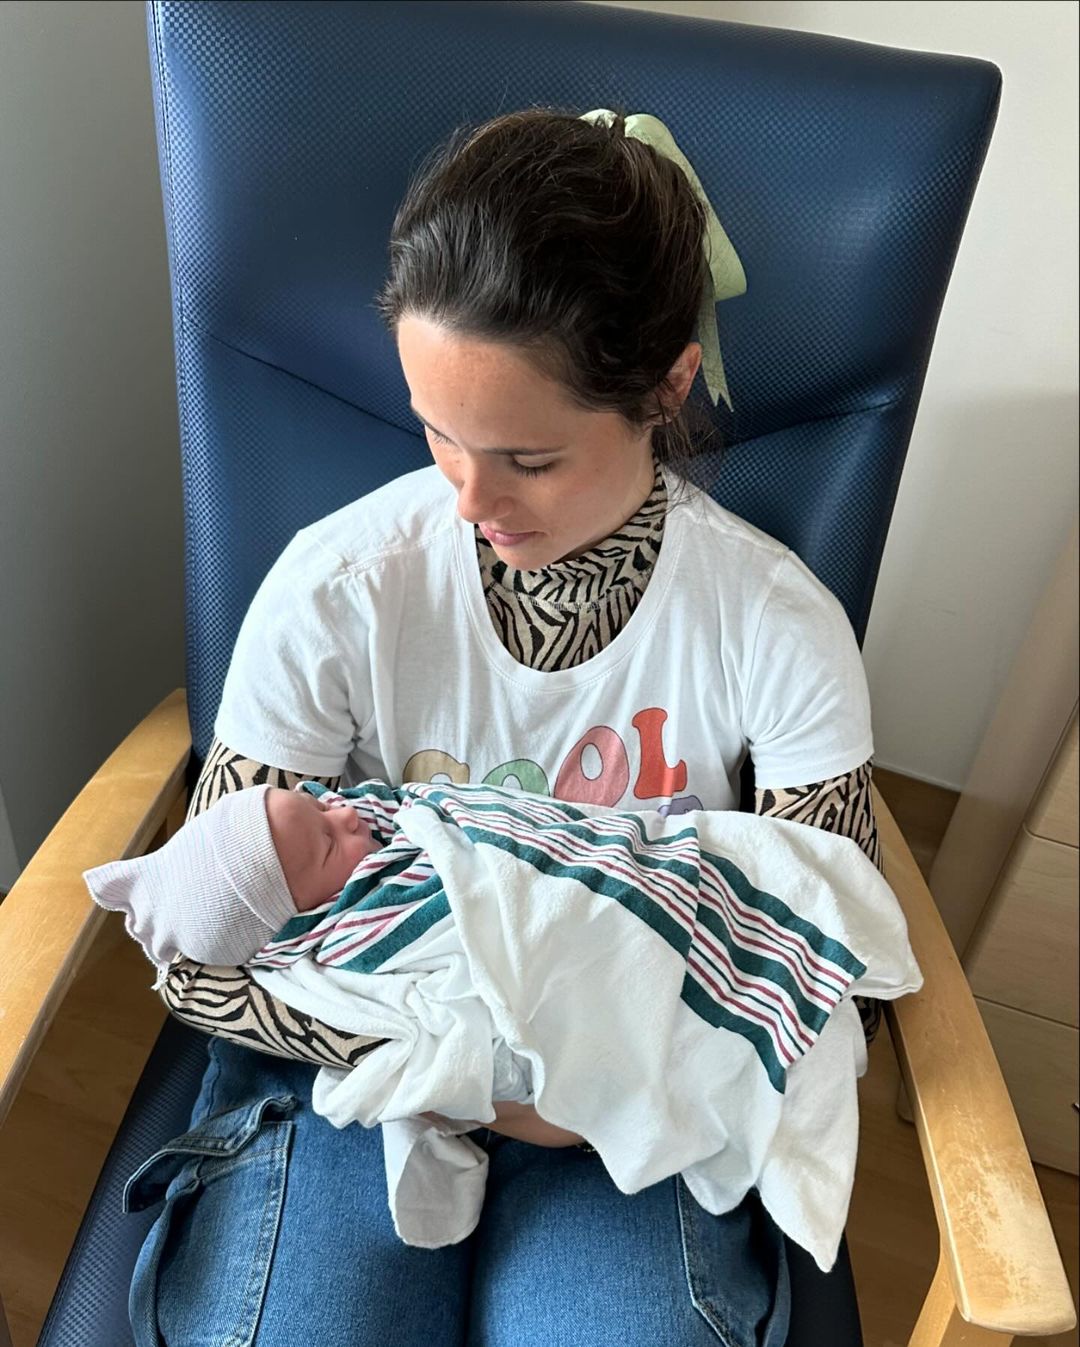 She shared a snap of her other daughter Carrie cradling the newborn